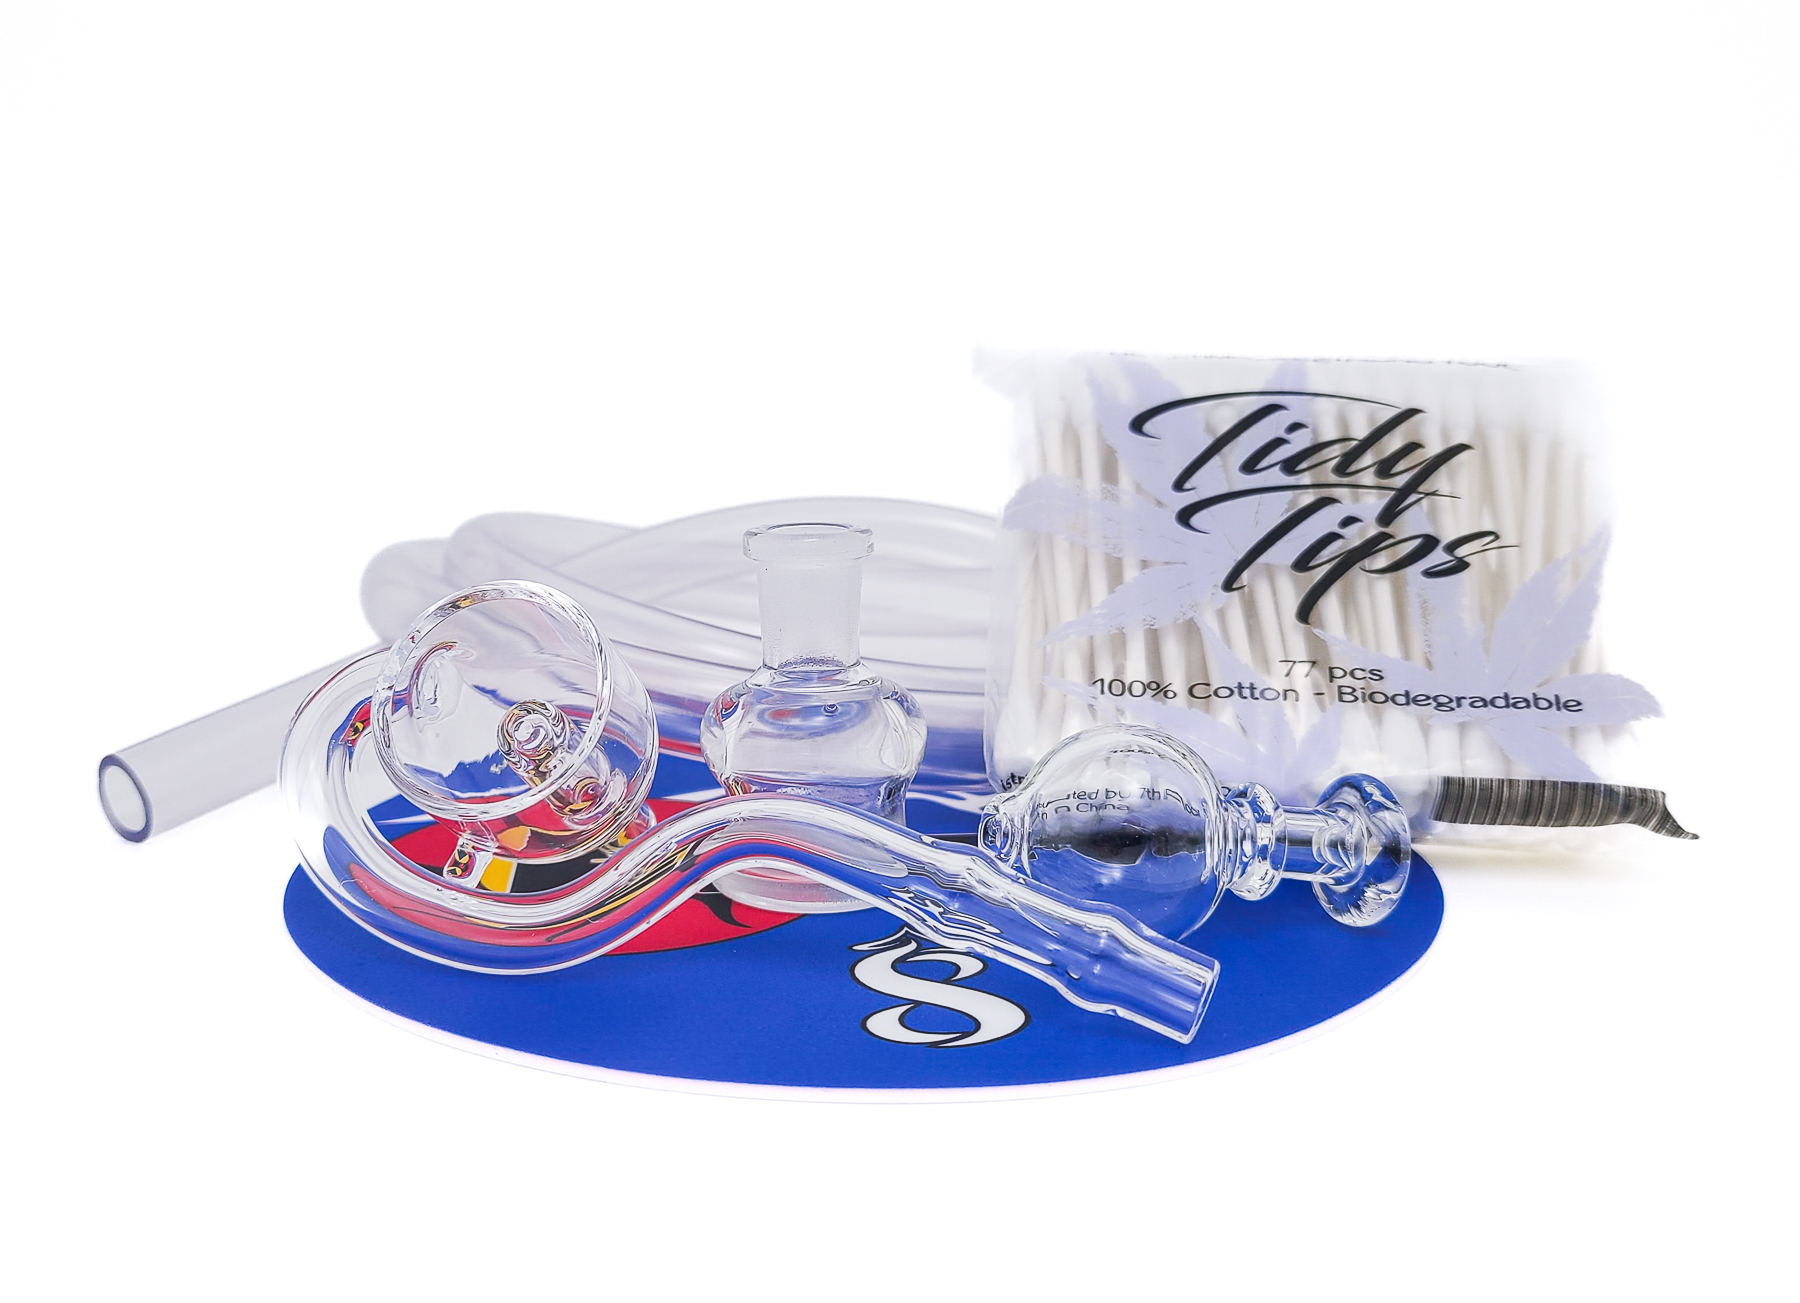 Silver Surfer Dab Dish Essential Oil Kit for Concentrates / $ 99.99 at 420  Science